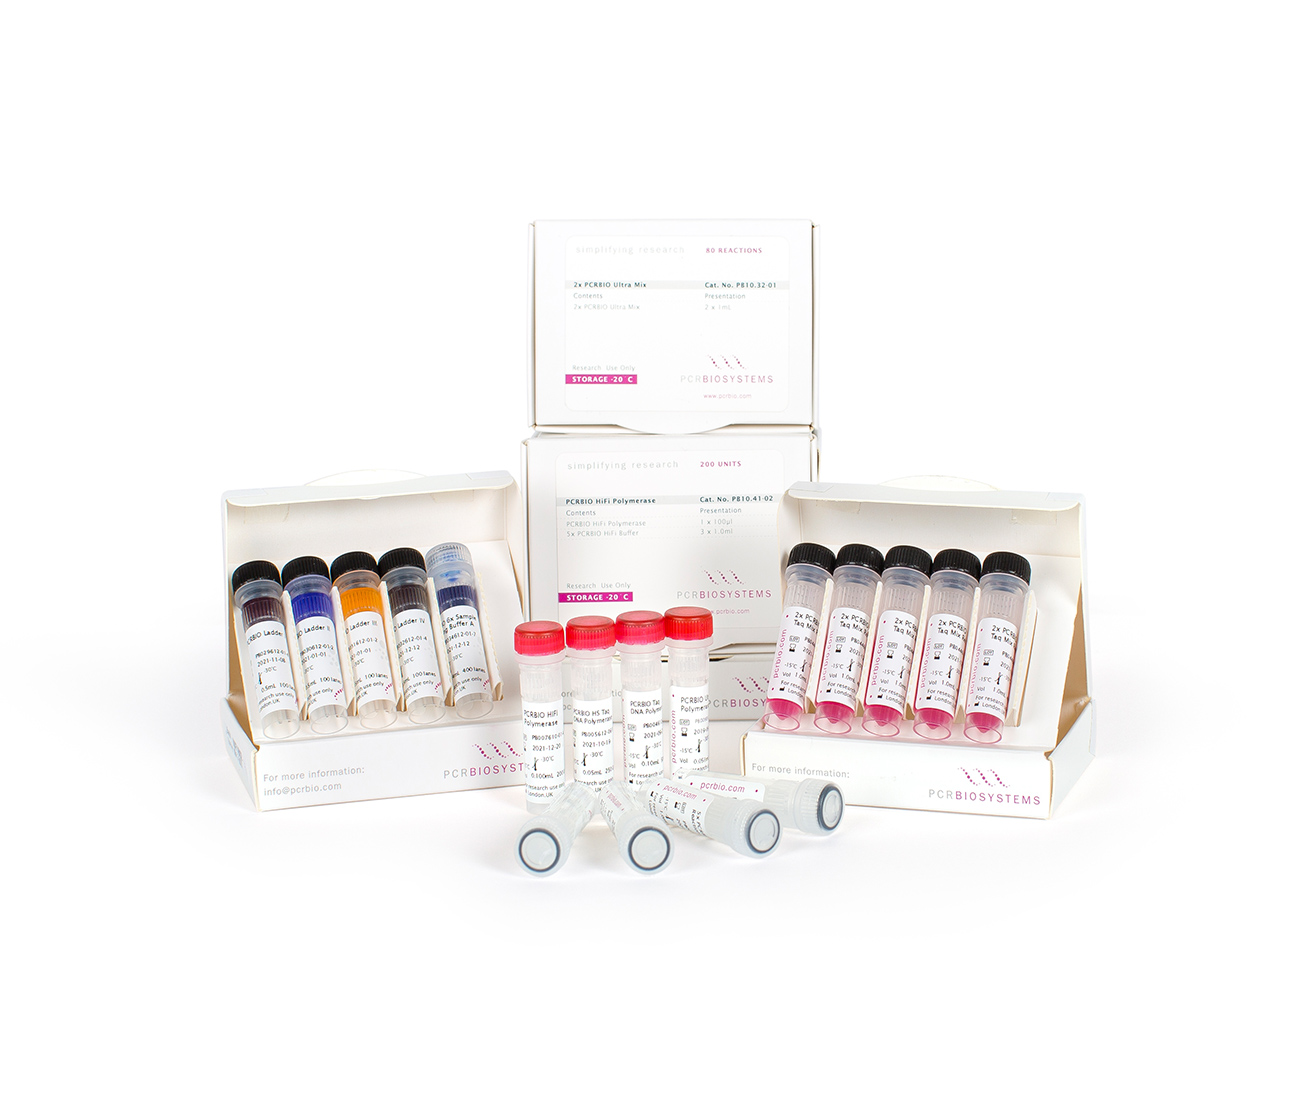 Product picture of PCRBIO's endpoint range